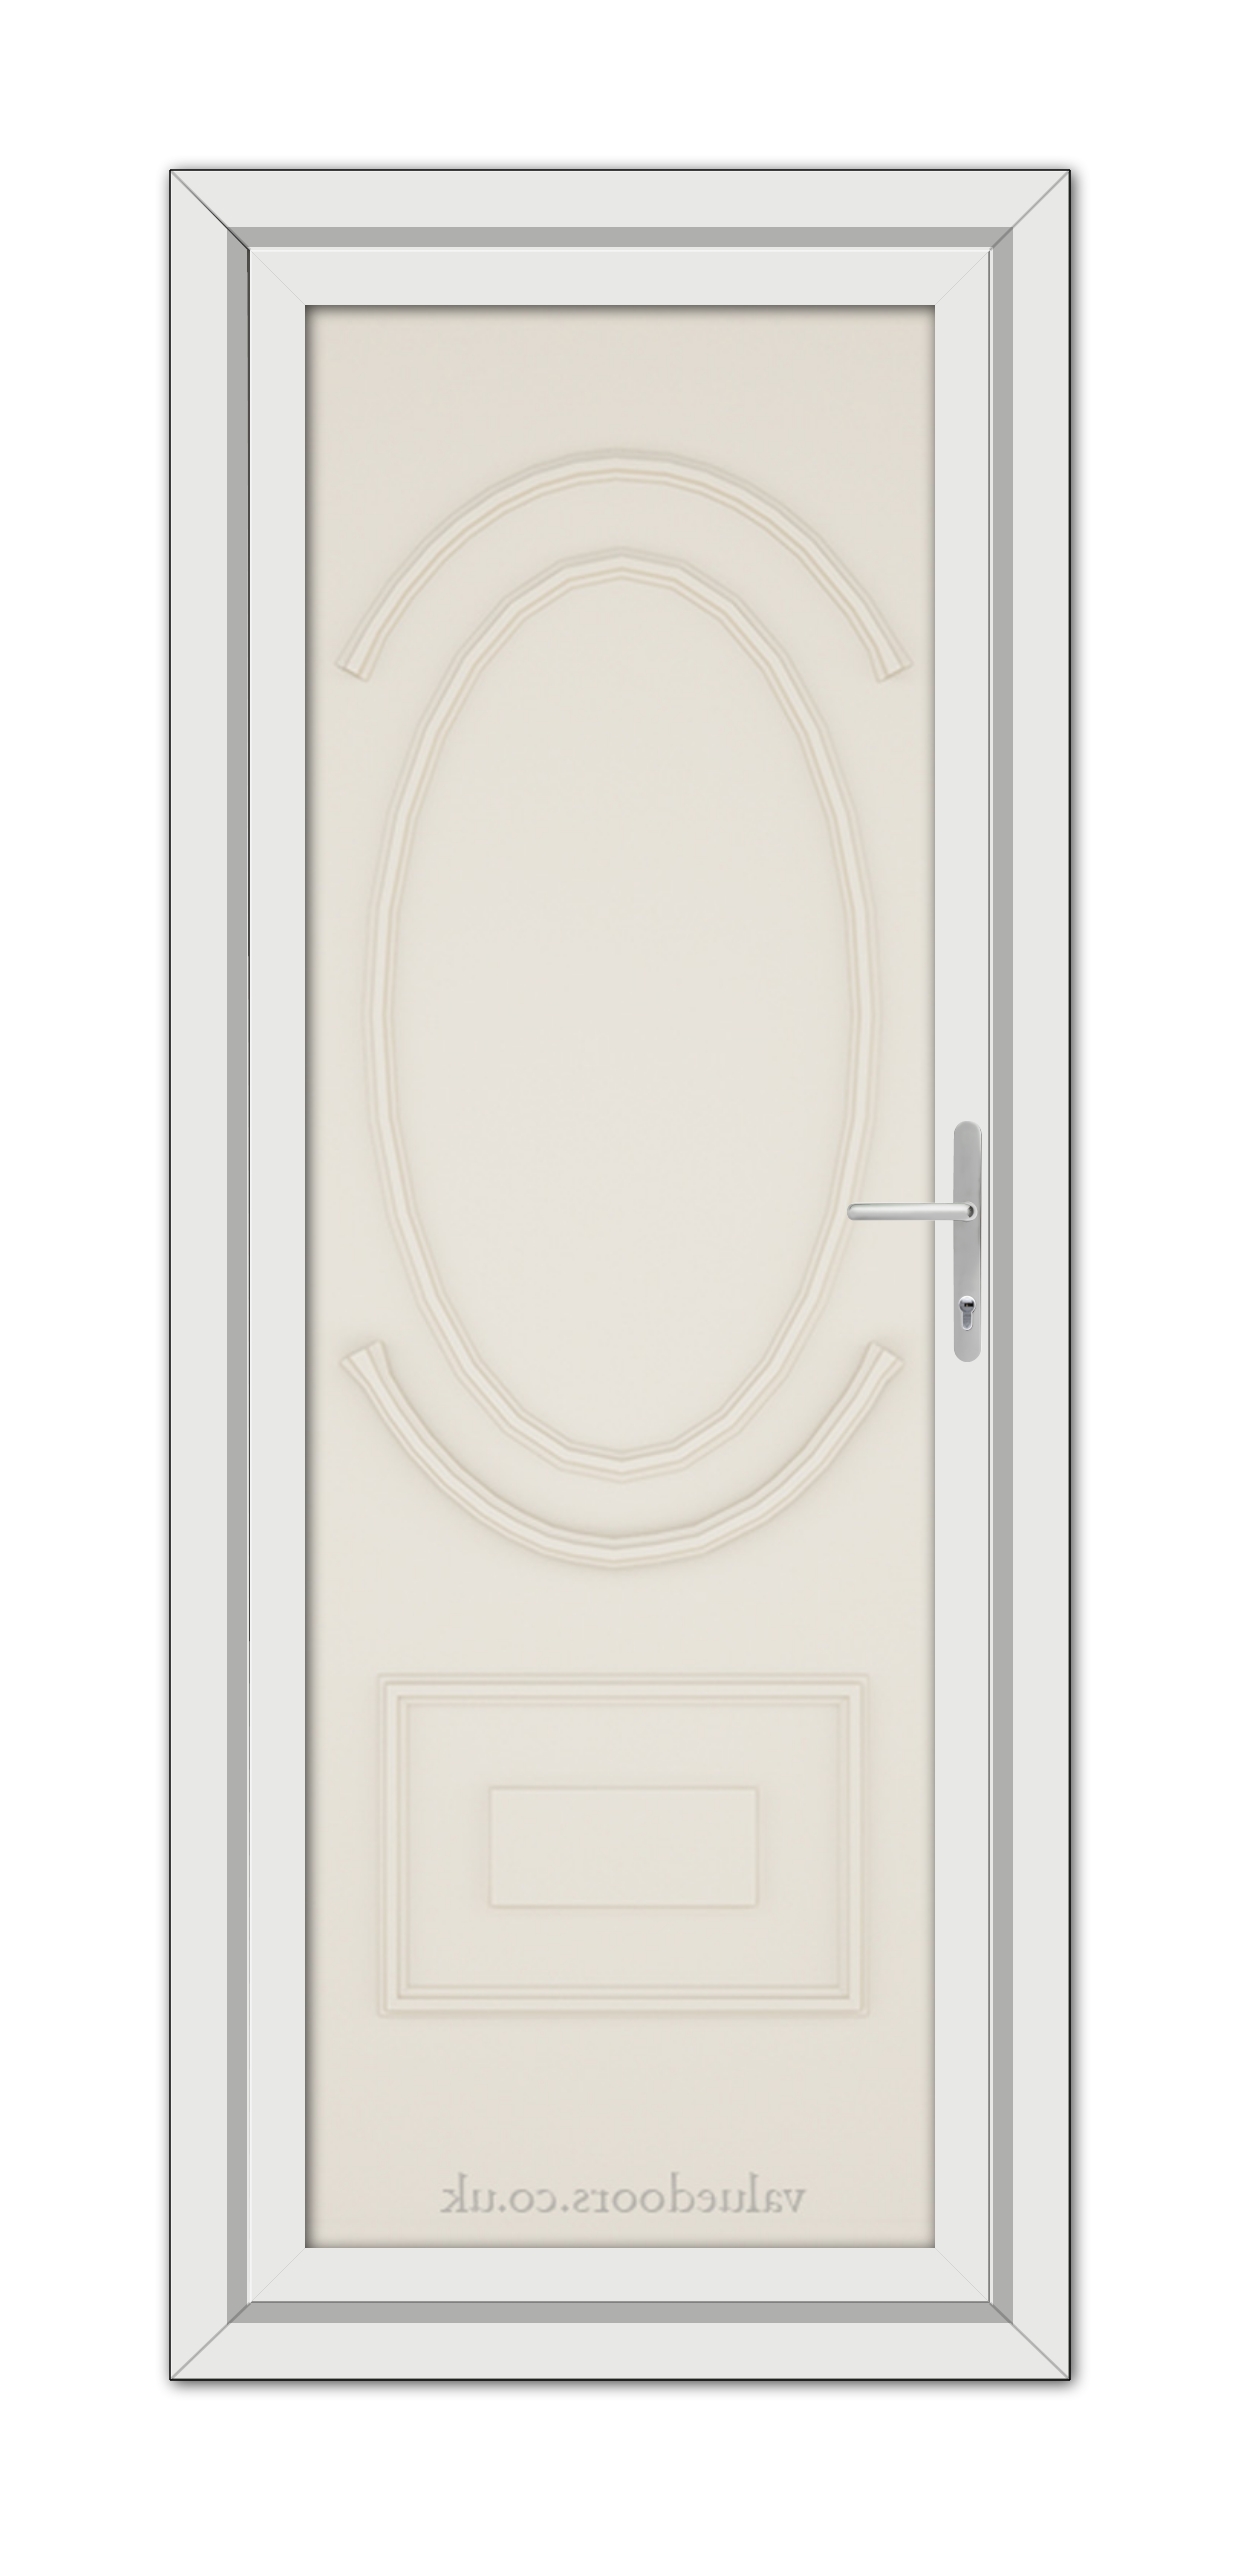 A vertical image of a closed, Cream Richmond Solid uPVC Door with an oval window and a handle on the right side, all set within a door frame.